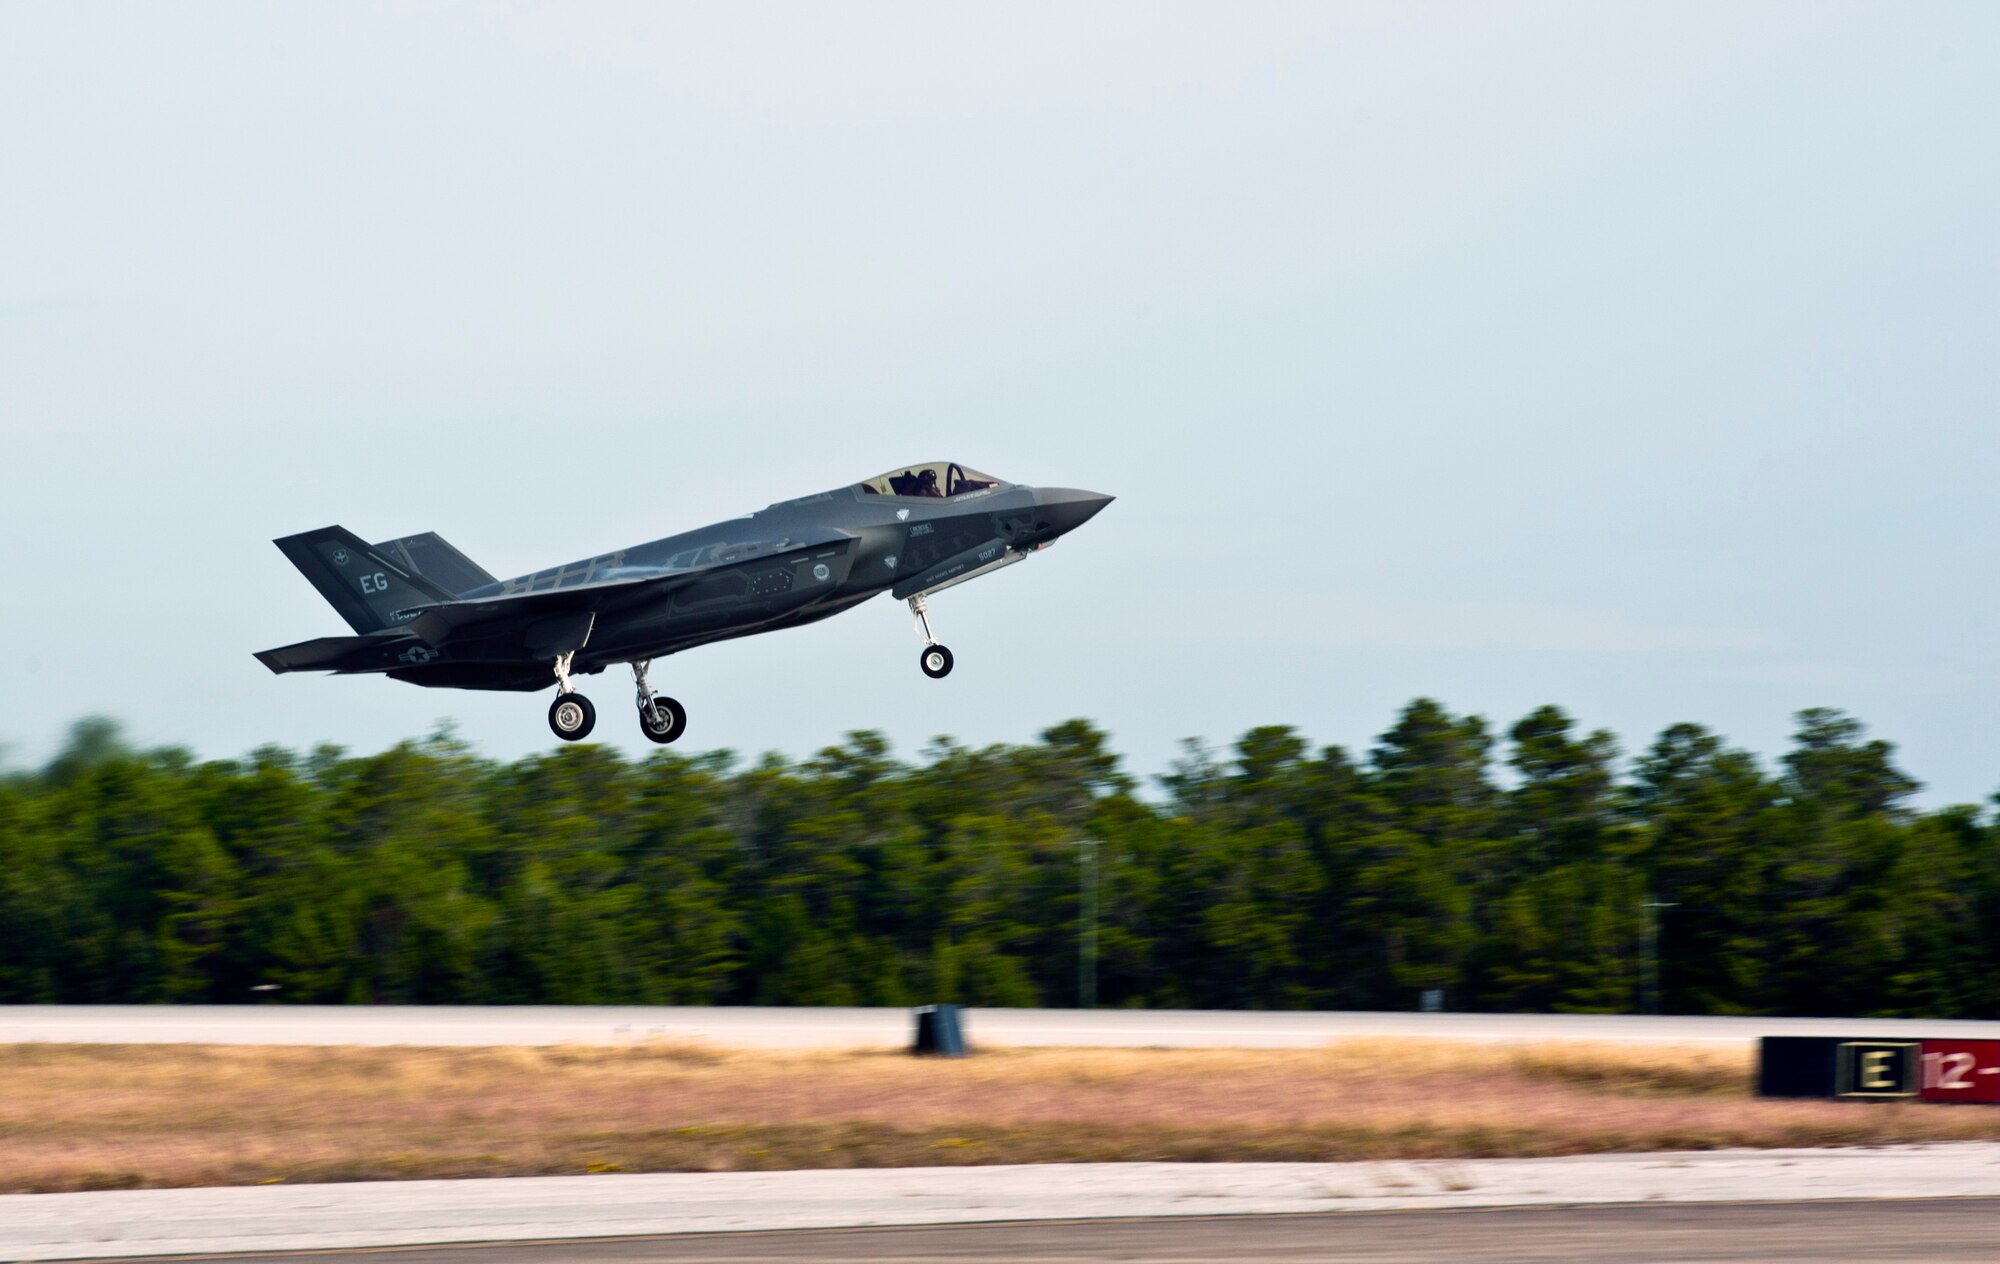 An F-35A Lightning II takes off for an integrated training mission on Eglin Air Force Base, Florida, Nov. 5, 2014. The U.S. Air Force deployed four F-22A Raptors from Joint Base Langley-Eustis, Virginia, to Eglin Air Force Base, Florida, for the first operational integration training mission with the F-35A Lightning II assigned to the 33rd Fighter Wing. The purpose of the training was to improve integrated employment of fifth-generation assets and tactics. (U.S. Air Force photo/Staff Sgt. Marleah Robertson)